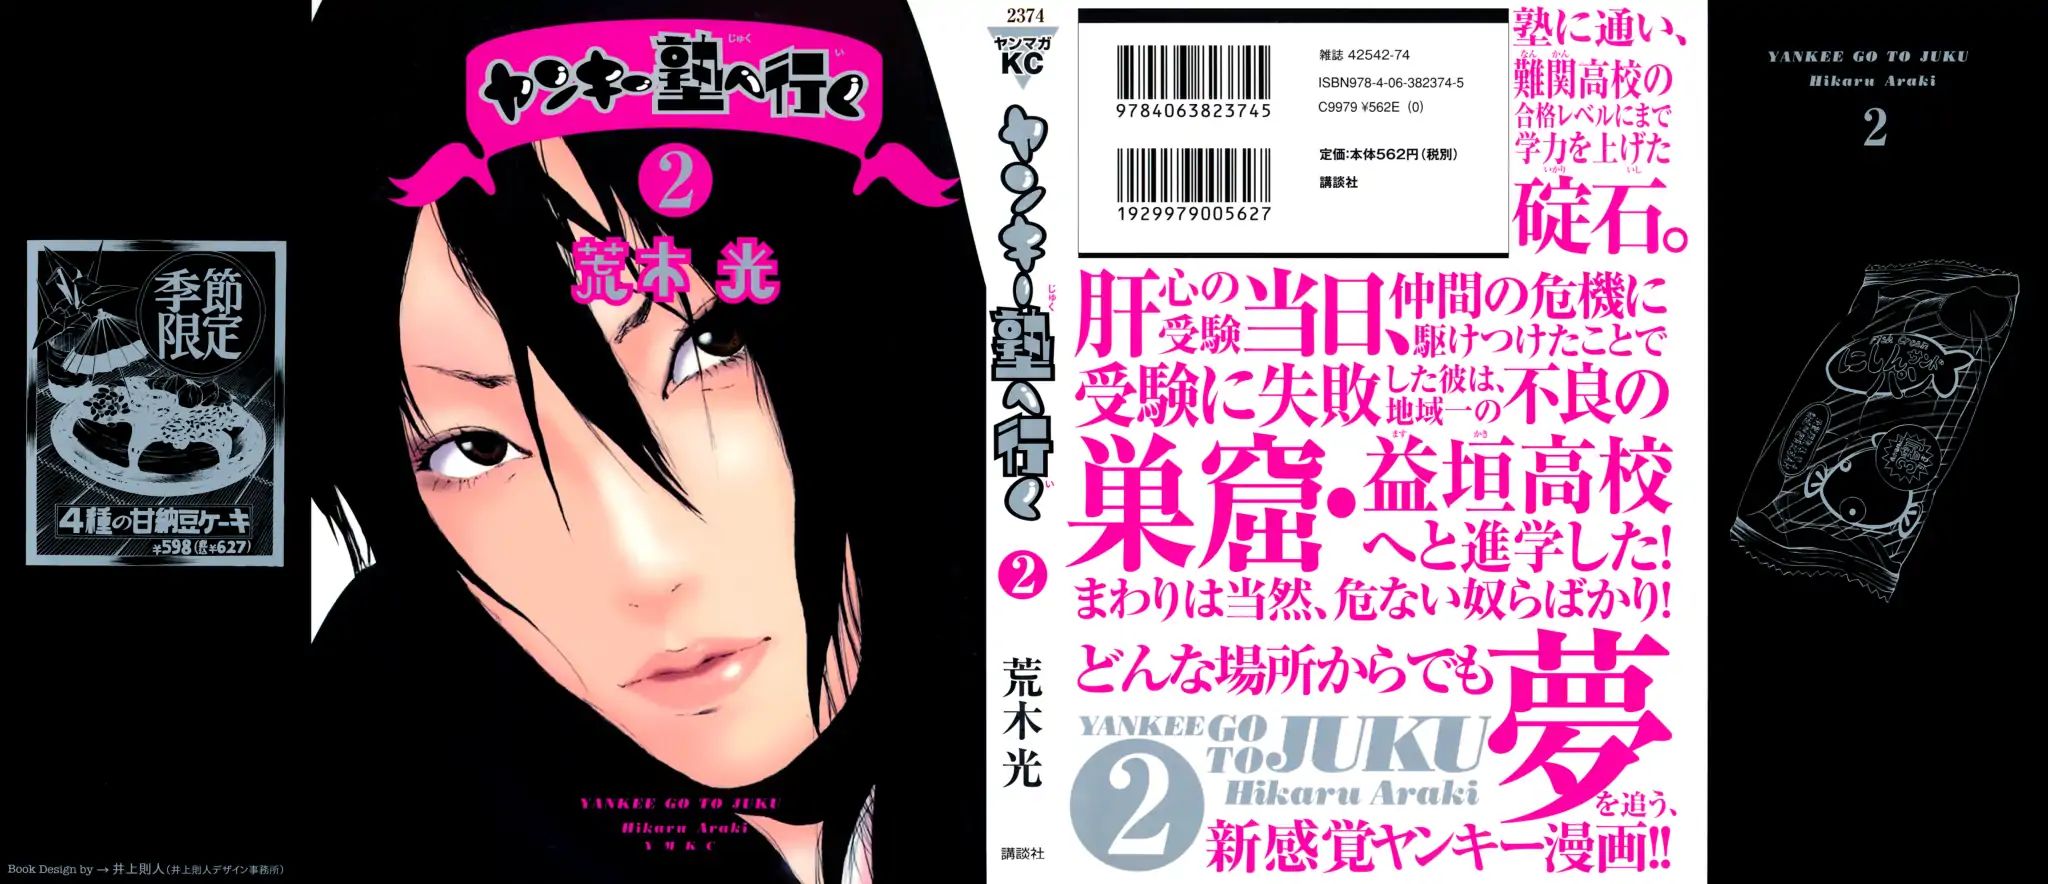 Yankee Go To Juku Vol.2 Chapter 8: The New Kid's Hot-blooded, Eh?